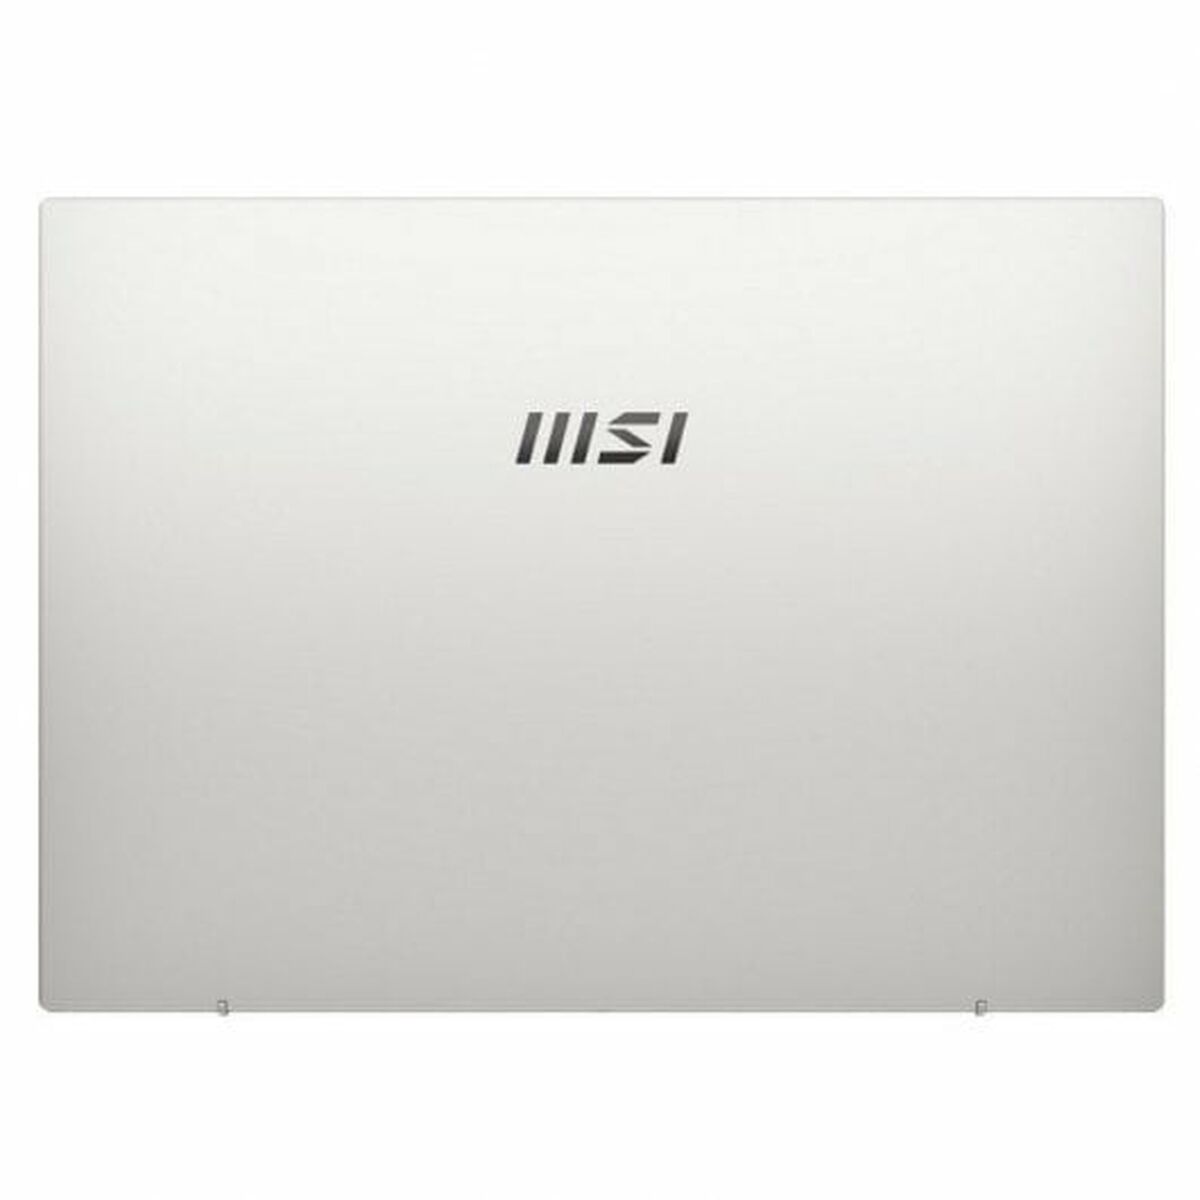 Laptop MSI Prestige 14H B12UCX-414XES 14" i5-12450H 16 GB RAM 512 GB SSD Nvidia GeForce RTX 2050, MSI, Computing, notebook-msi-prestige-14h-b12ucx-414xes-i5-12450h-16-gb-ram-512-gb-ssd, :512 GB, :Intel-i5, :QWERTY, :RAM 16 GB, Brand_MSI, category-reference-2609, category-reference-2791, category-reference-2797, category-reference-t-19685, Condition_NEW, office, Price_+ 1000, Teleworking, RiotNook